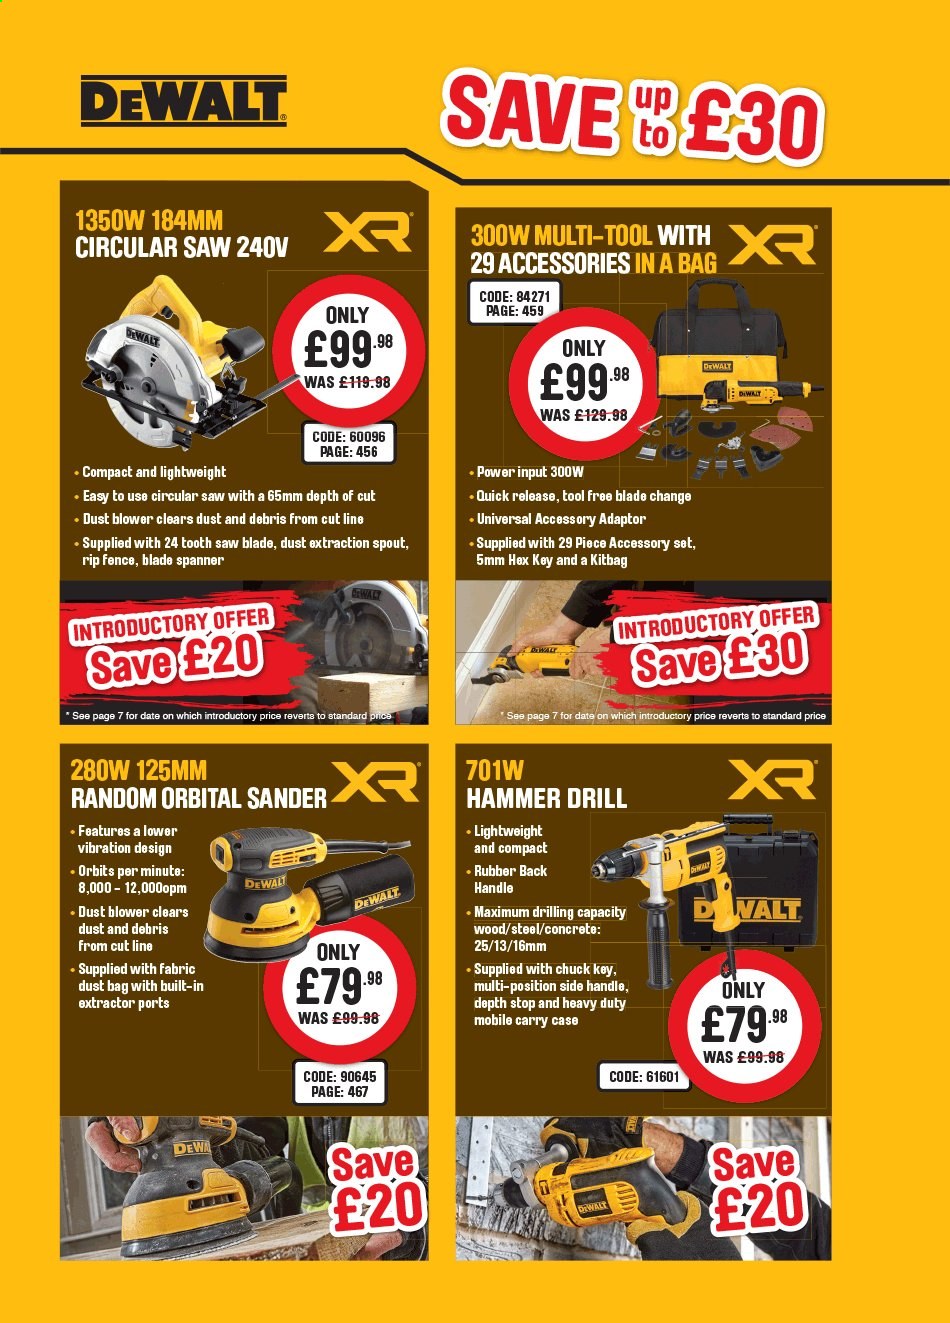 Toolstation offer . Page 426.